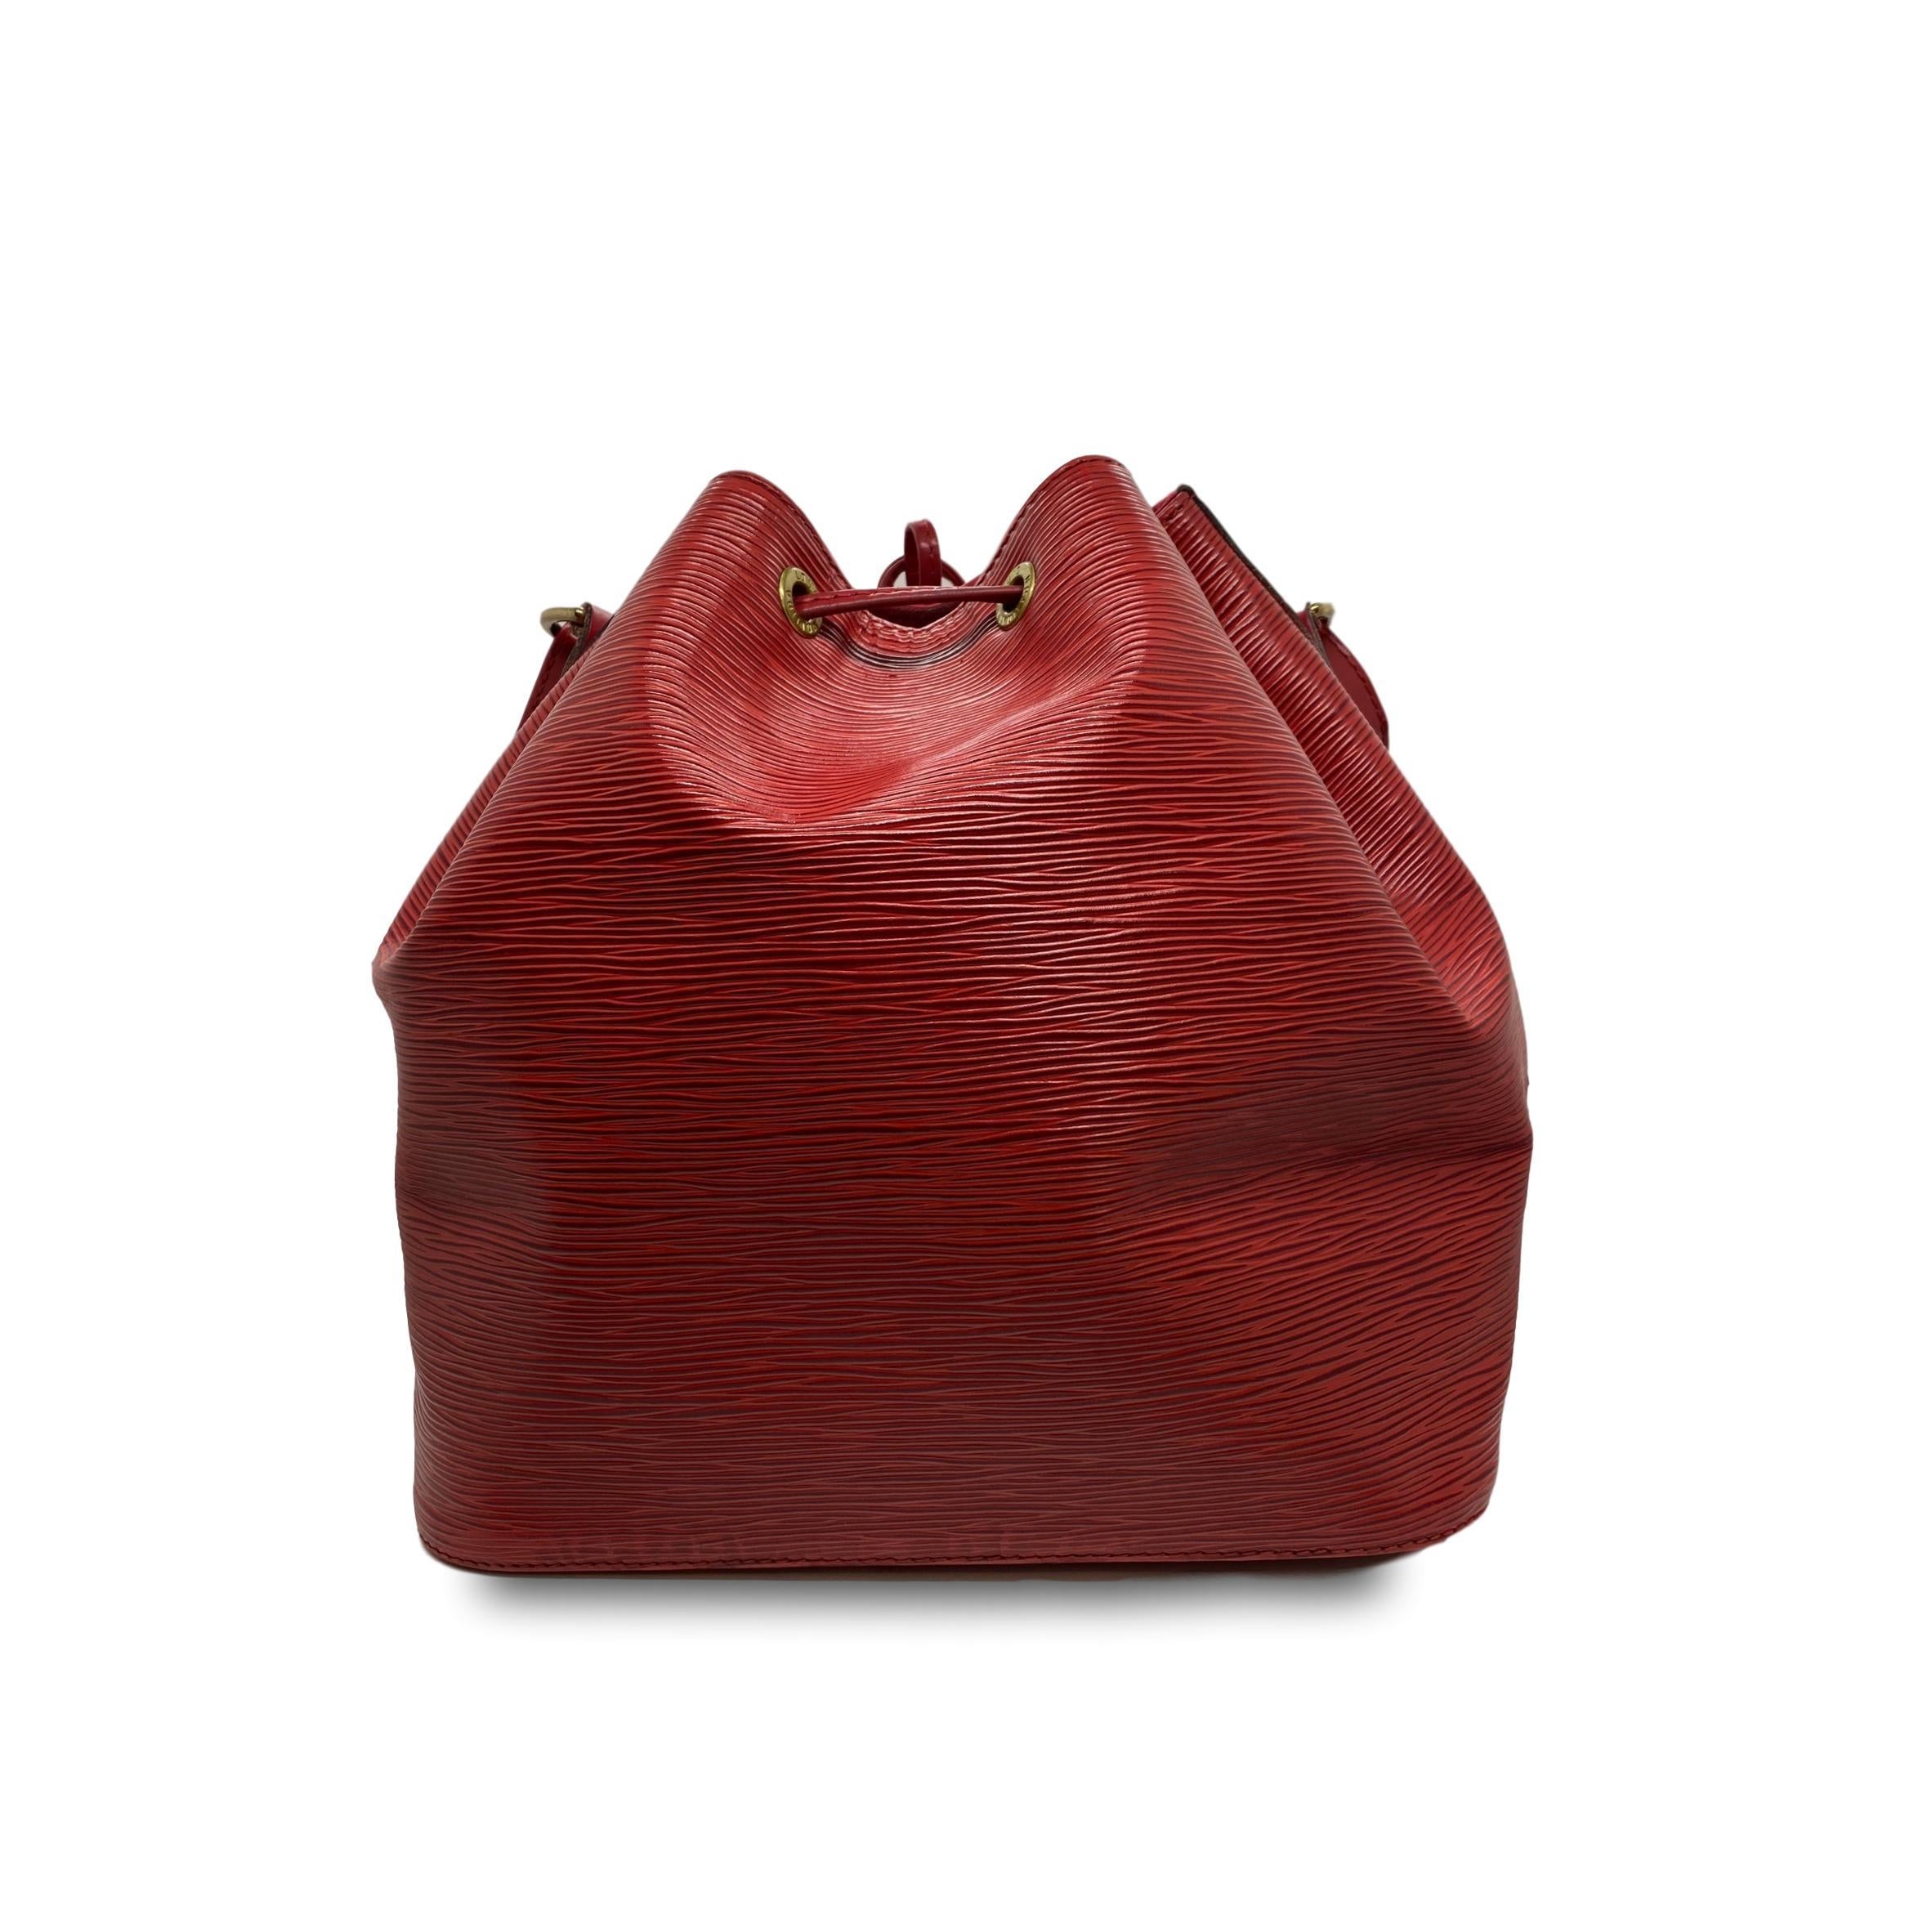 Vintage Louis Vuitton “Noe” Carmine Red EPI Leather Bucket Bag, circa June 1995. Made in France, the Noe was originally designed by Louis Vuitton’s grandson in 1932 as a bag to carry champagne, specifically four bottles upright and one inverted in